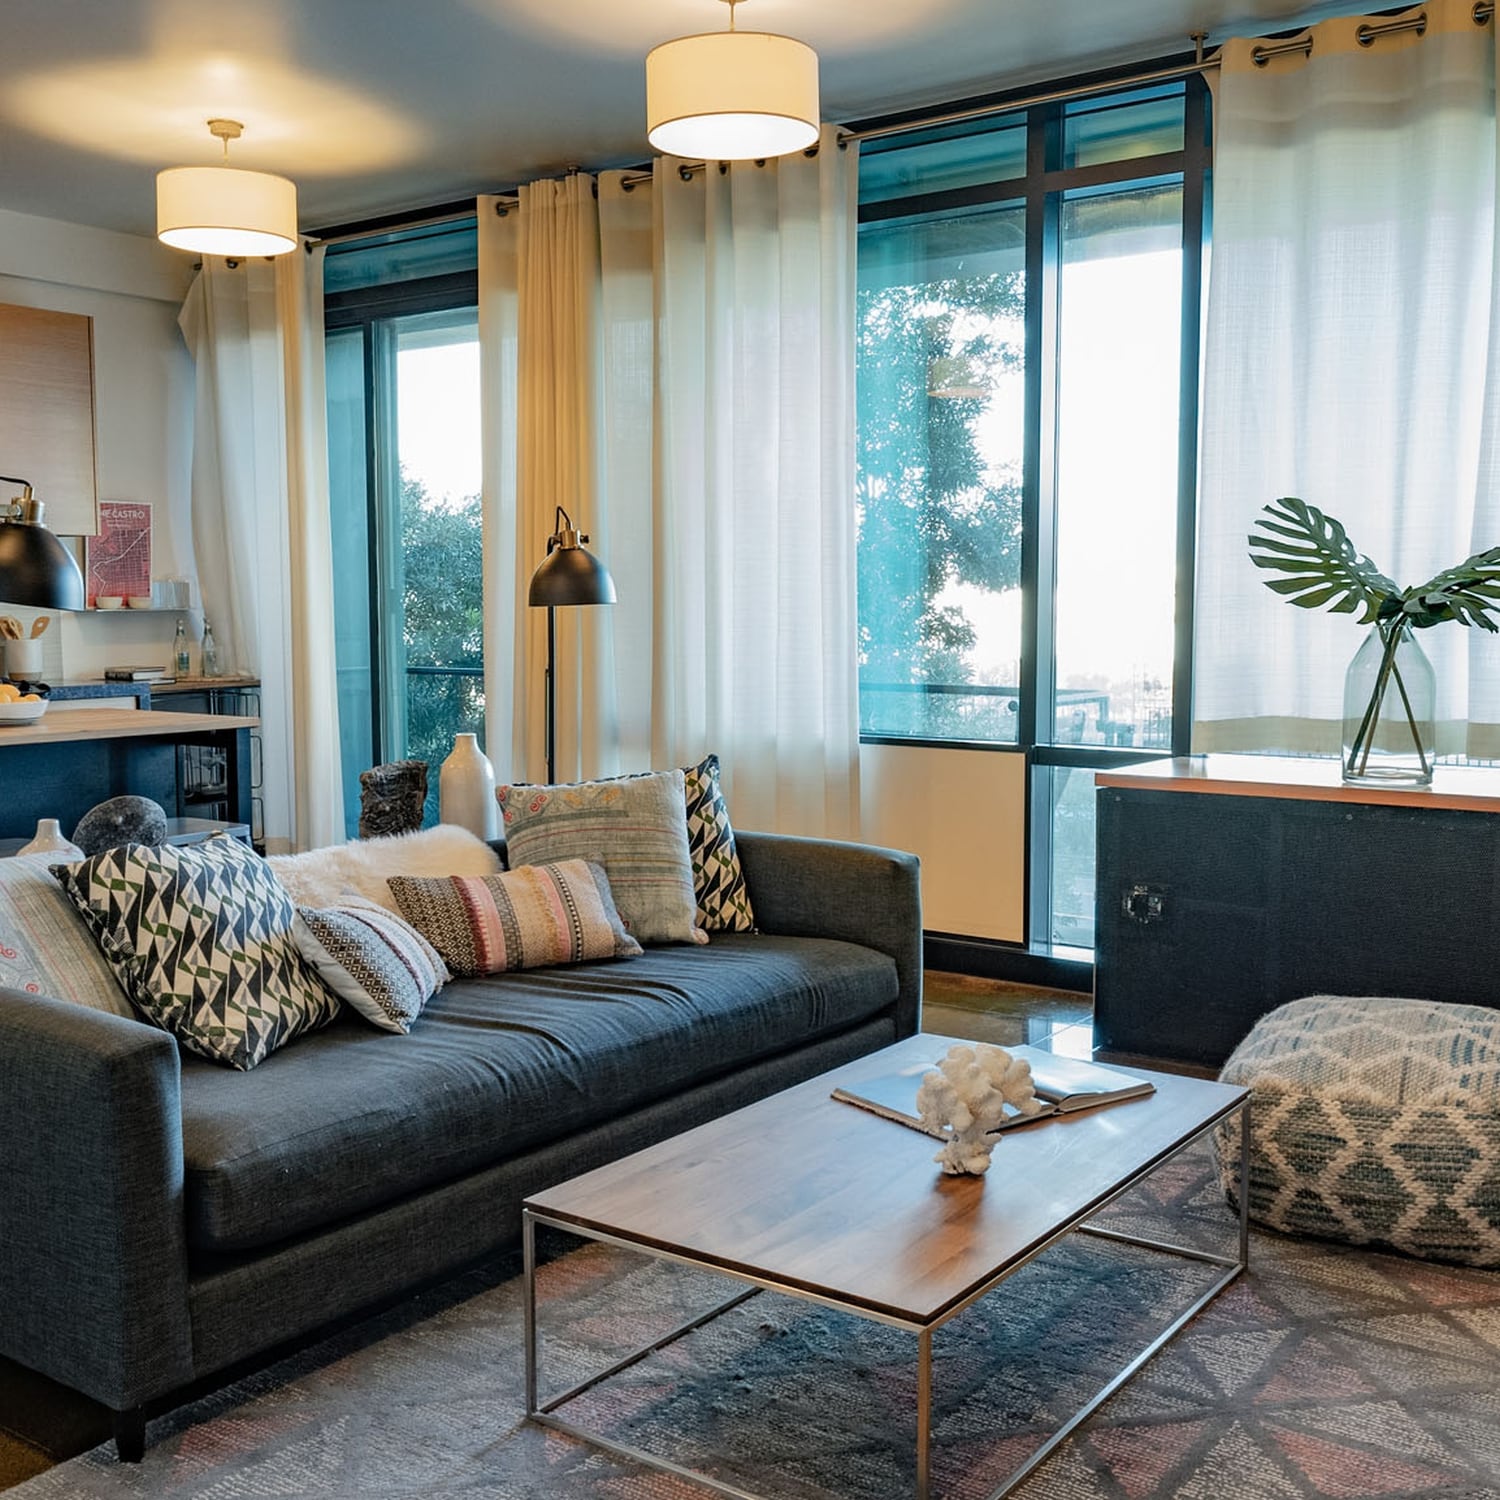 Apartments in Dogpatch San Francisco CA-Stylish Living Room With Concrete Floors and Large Windows